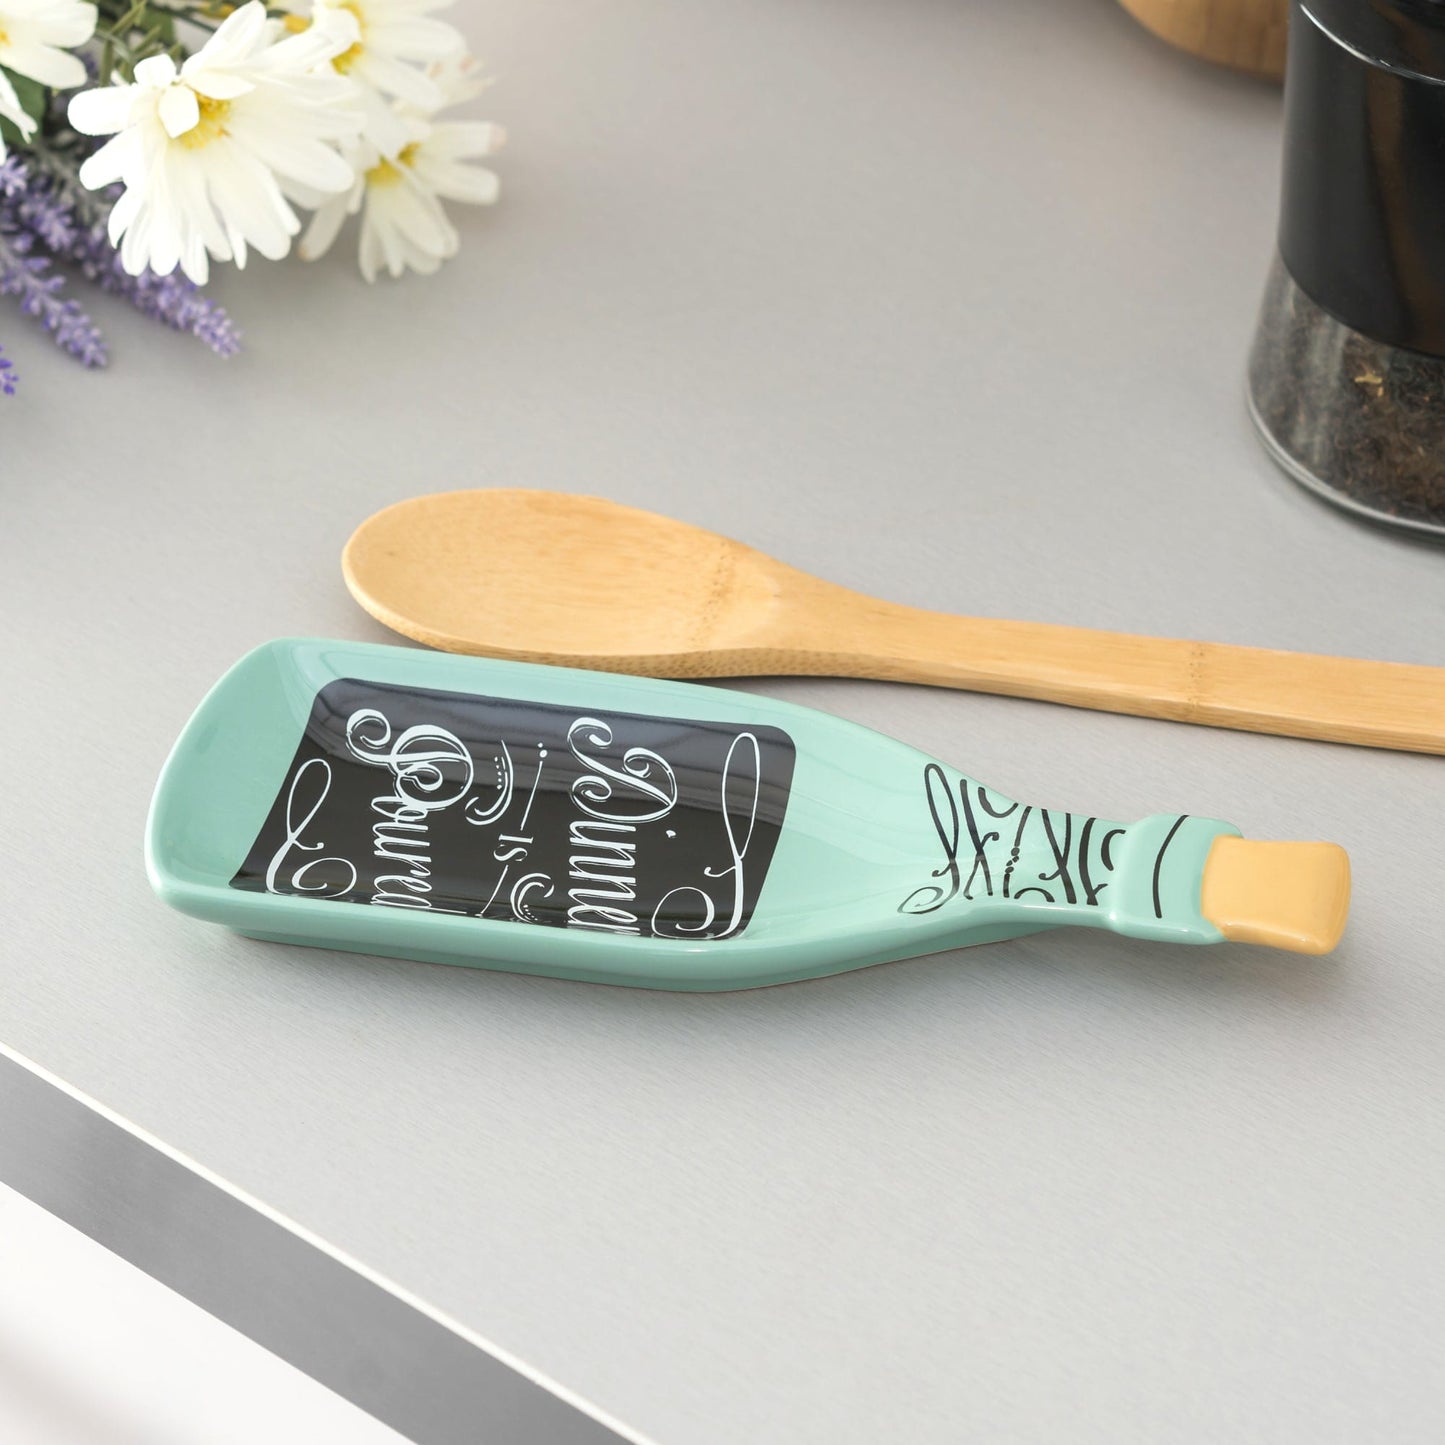 Dinner is Poured Wine Shape Ceramic Spoon Rest, Teal